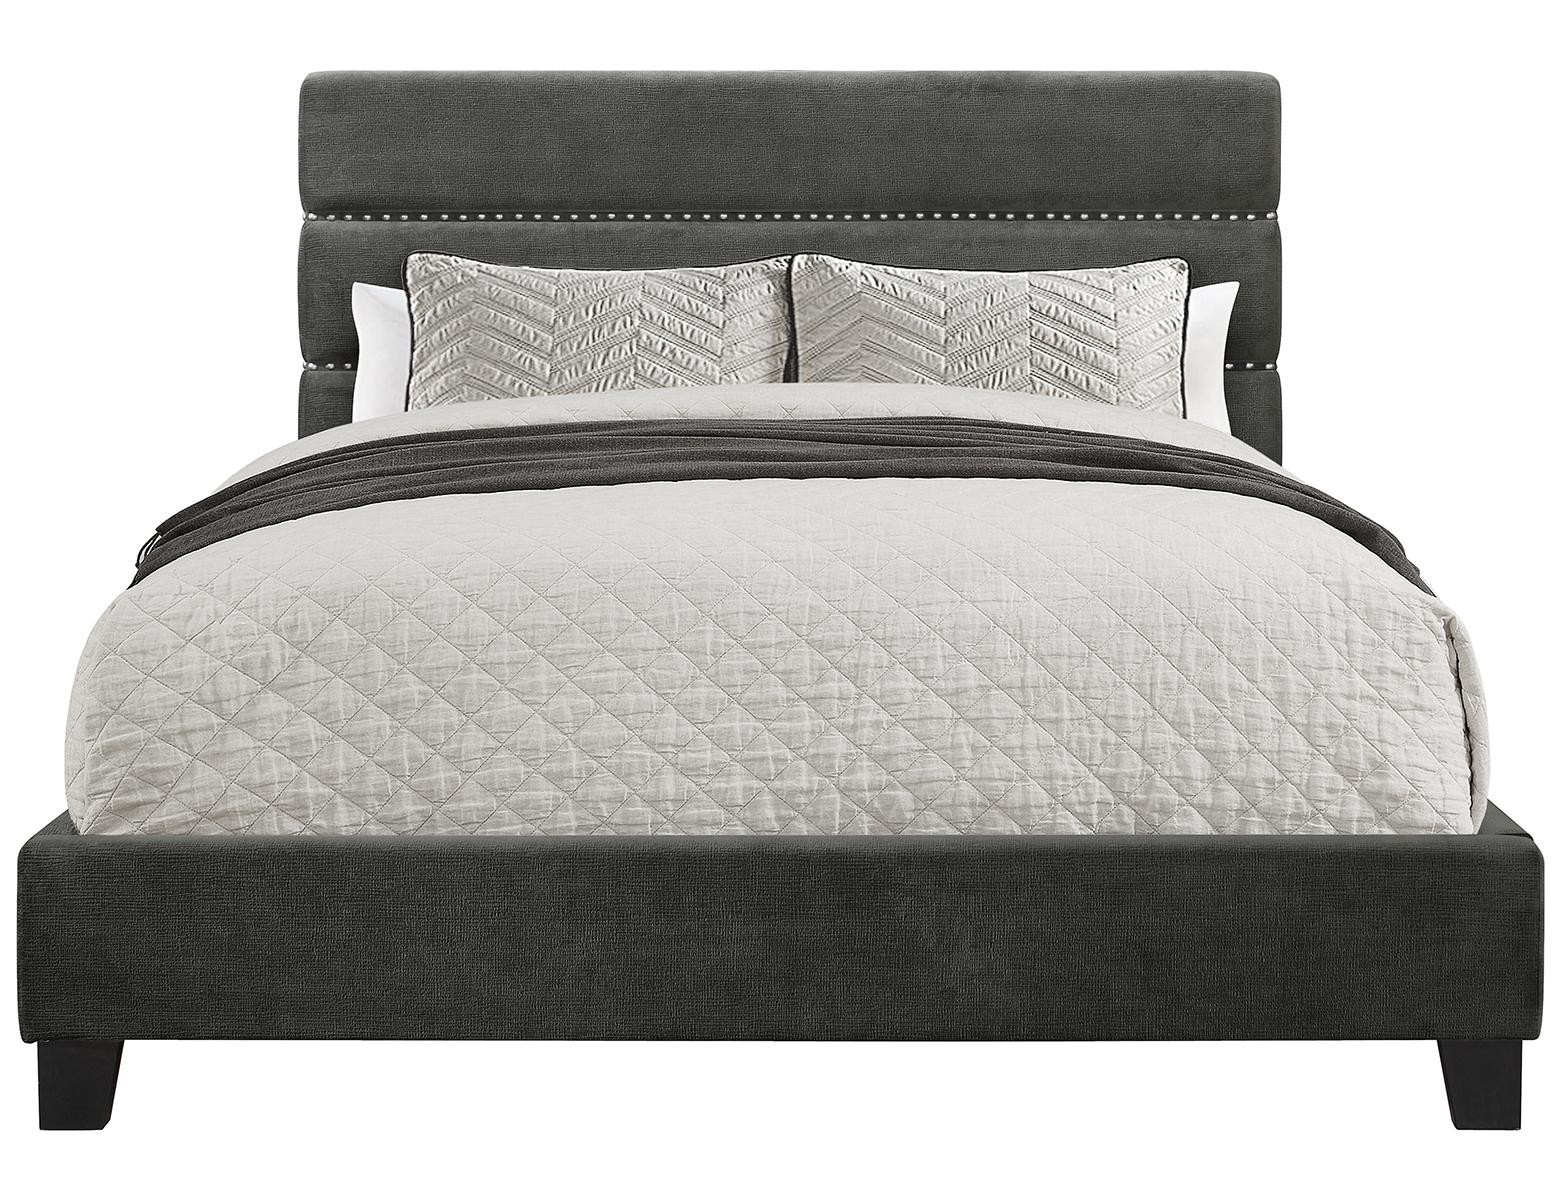 Pulaski ACH All-In-One Queen Horizontally Channeled Upholstered Bed in Grey